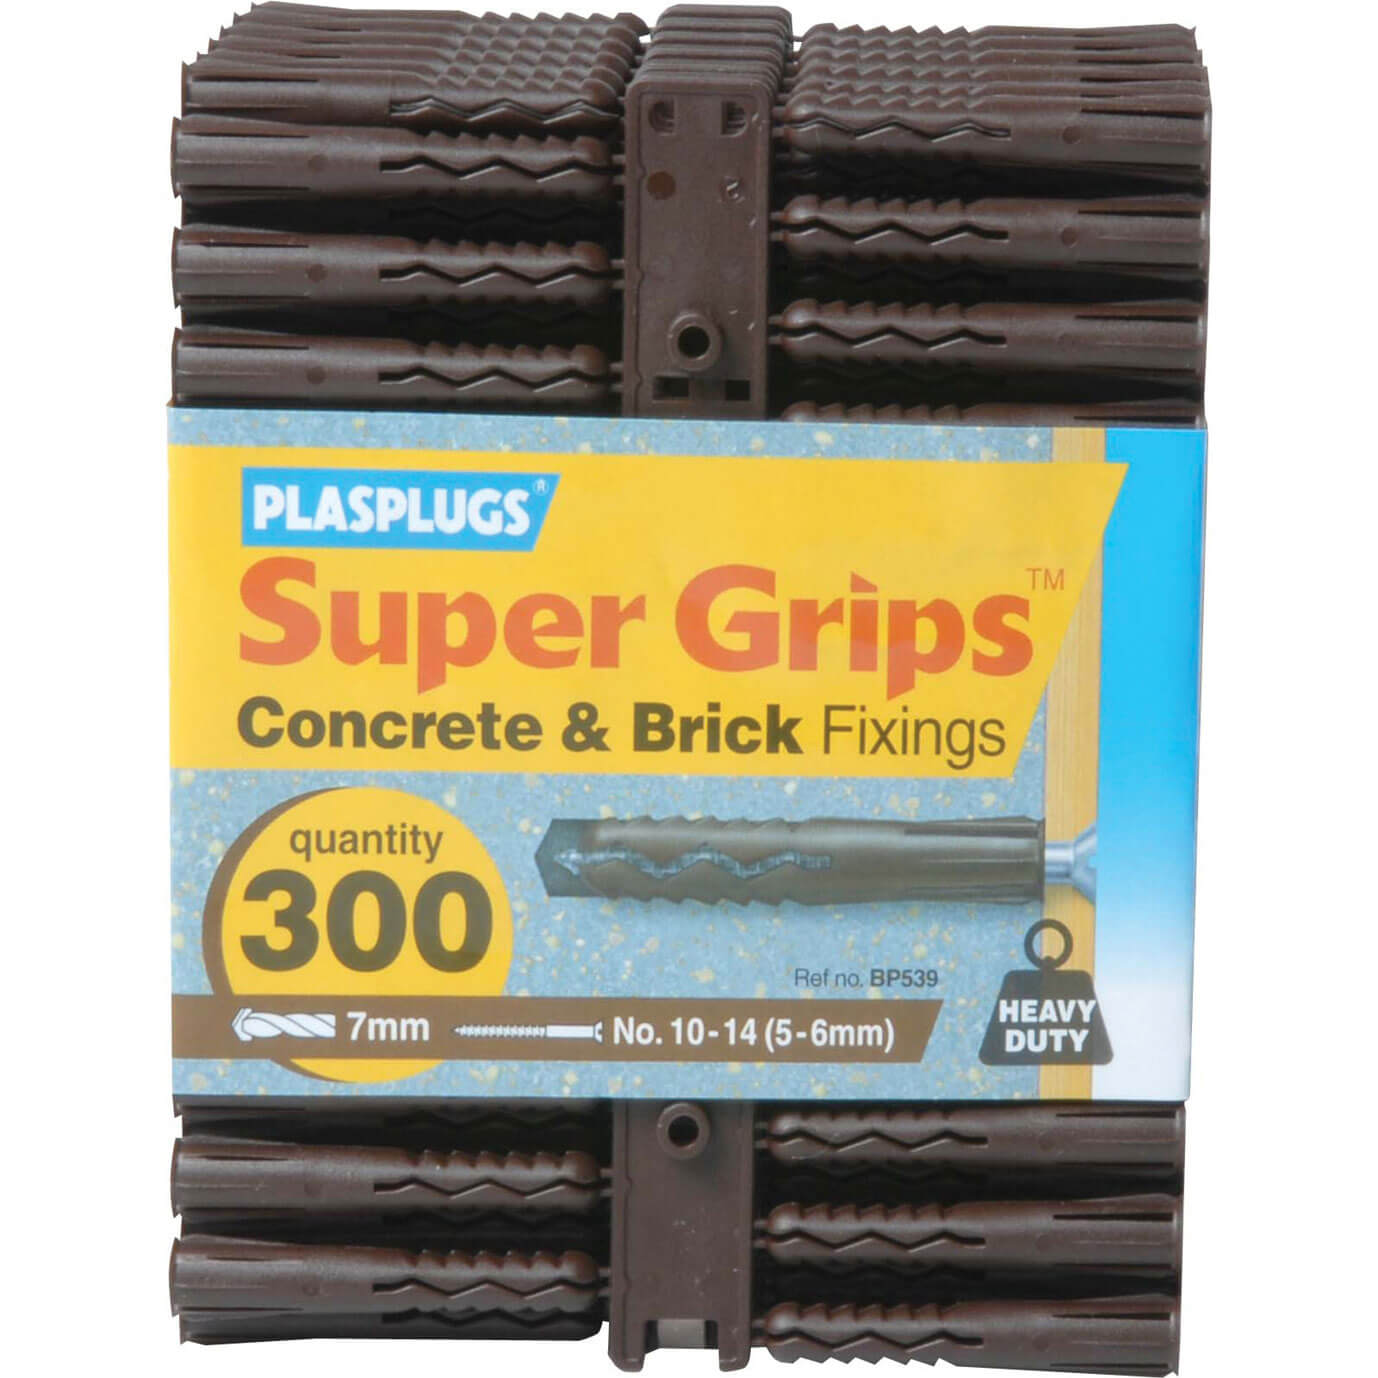 Image of Plasplugs Heavy Duty Super Grips Concrete and Brick Fixings Pack of 300